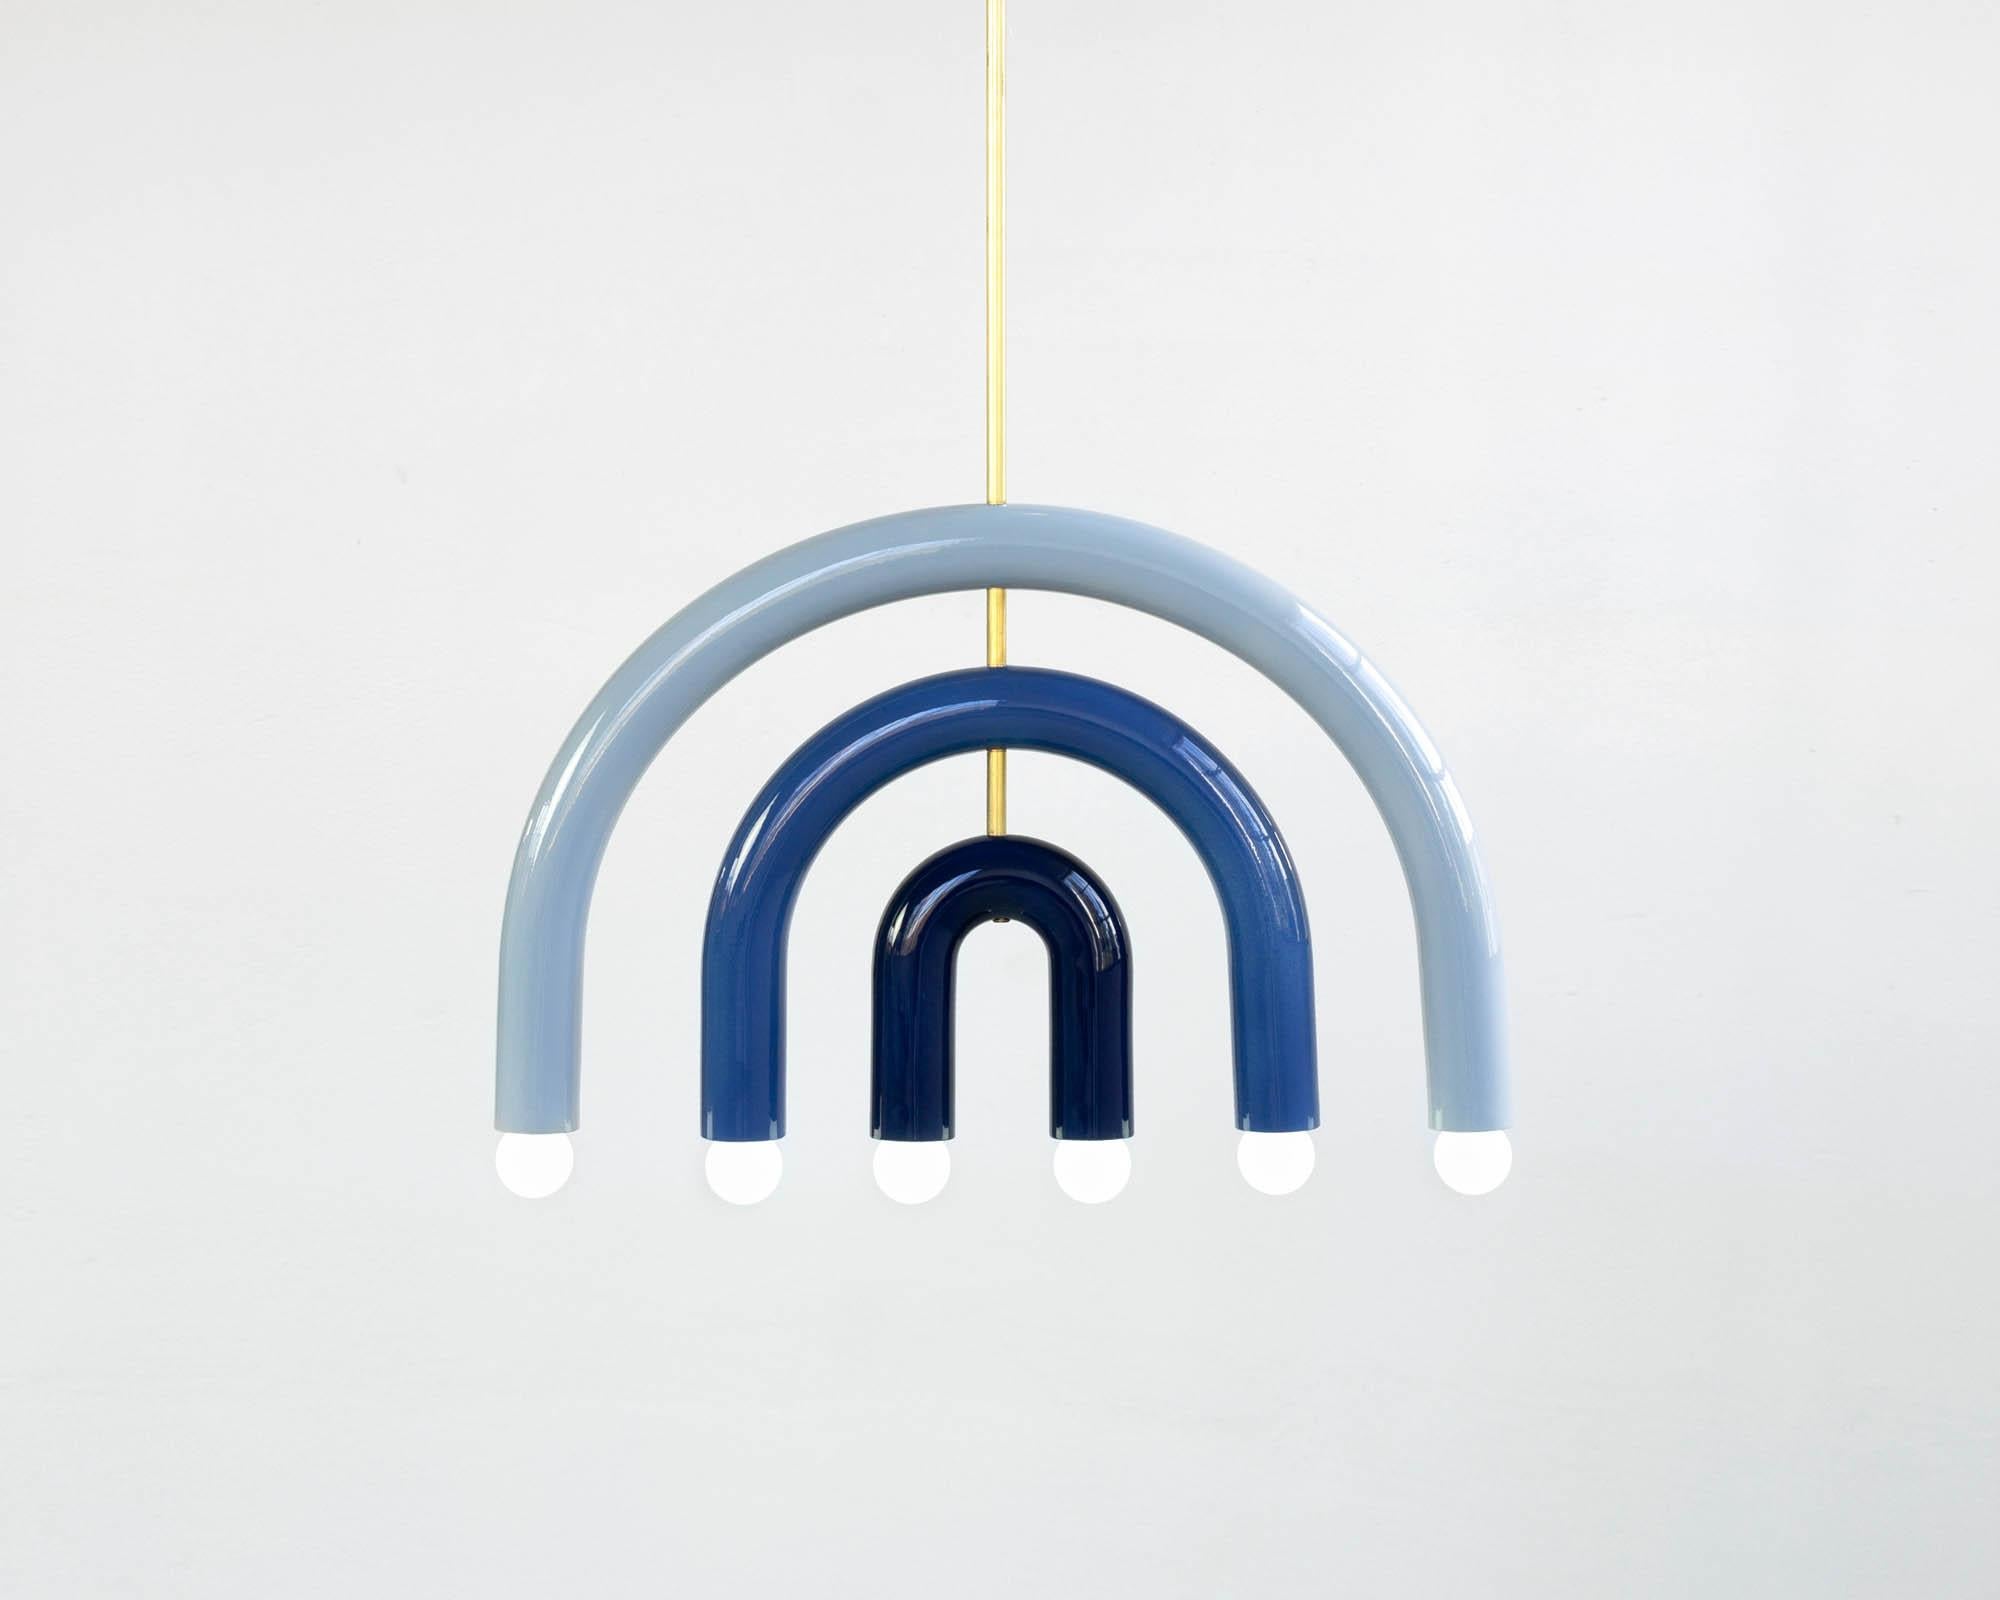 TRN F1 Pendant lamp / ceiling lamp / chandelier
Signed by Pani Jurek

Dimensions: H. 375 x 55 x 5 cm
Model shown: Light blue, medium blue & navy blue 

Bulb (not included): E27/E26, compatible with US electric system

Materials: Hand-glazed ceramic